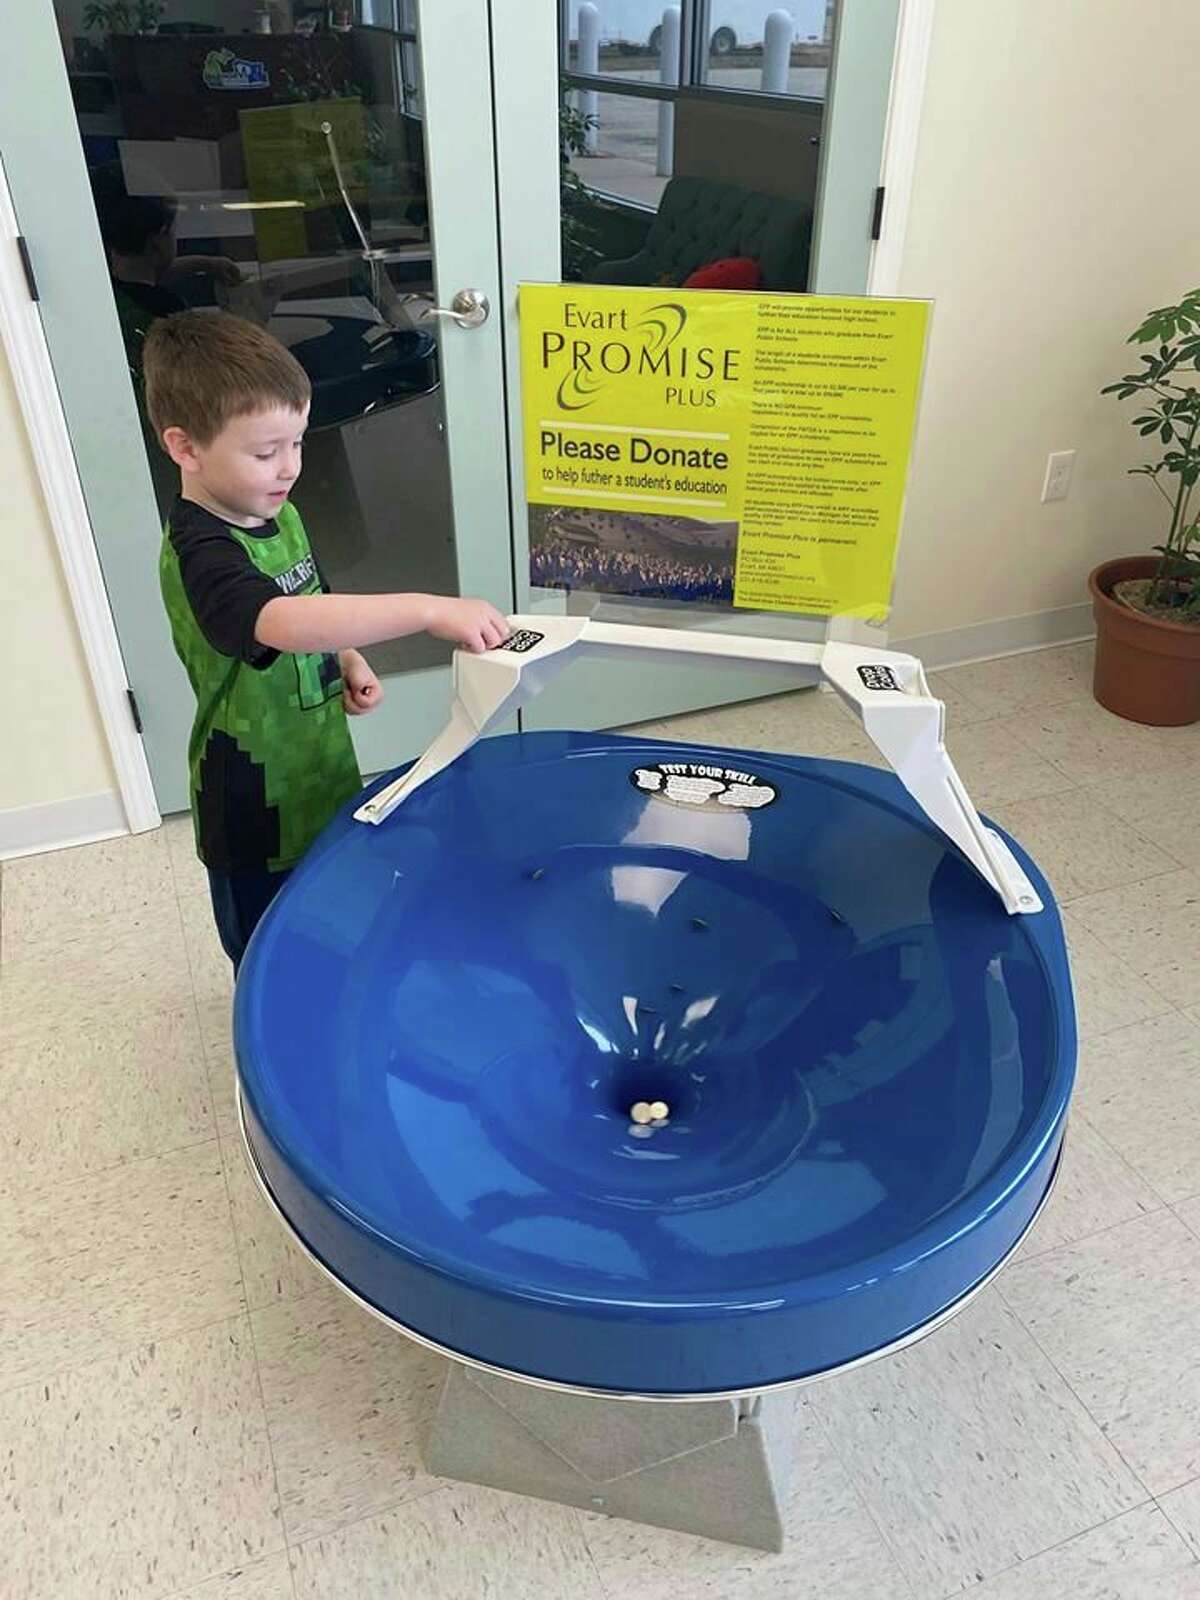 This spiral wishing well, purchased by the Evart Area Chamber of Commerce, will be placed inside Foster's Supermarket. (Submitted photo)